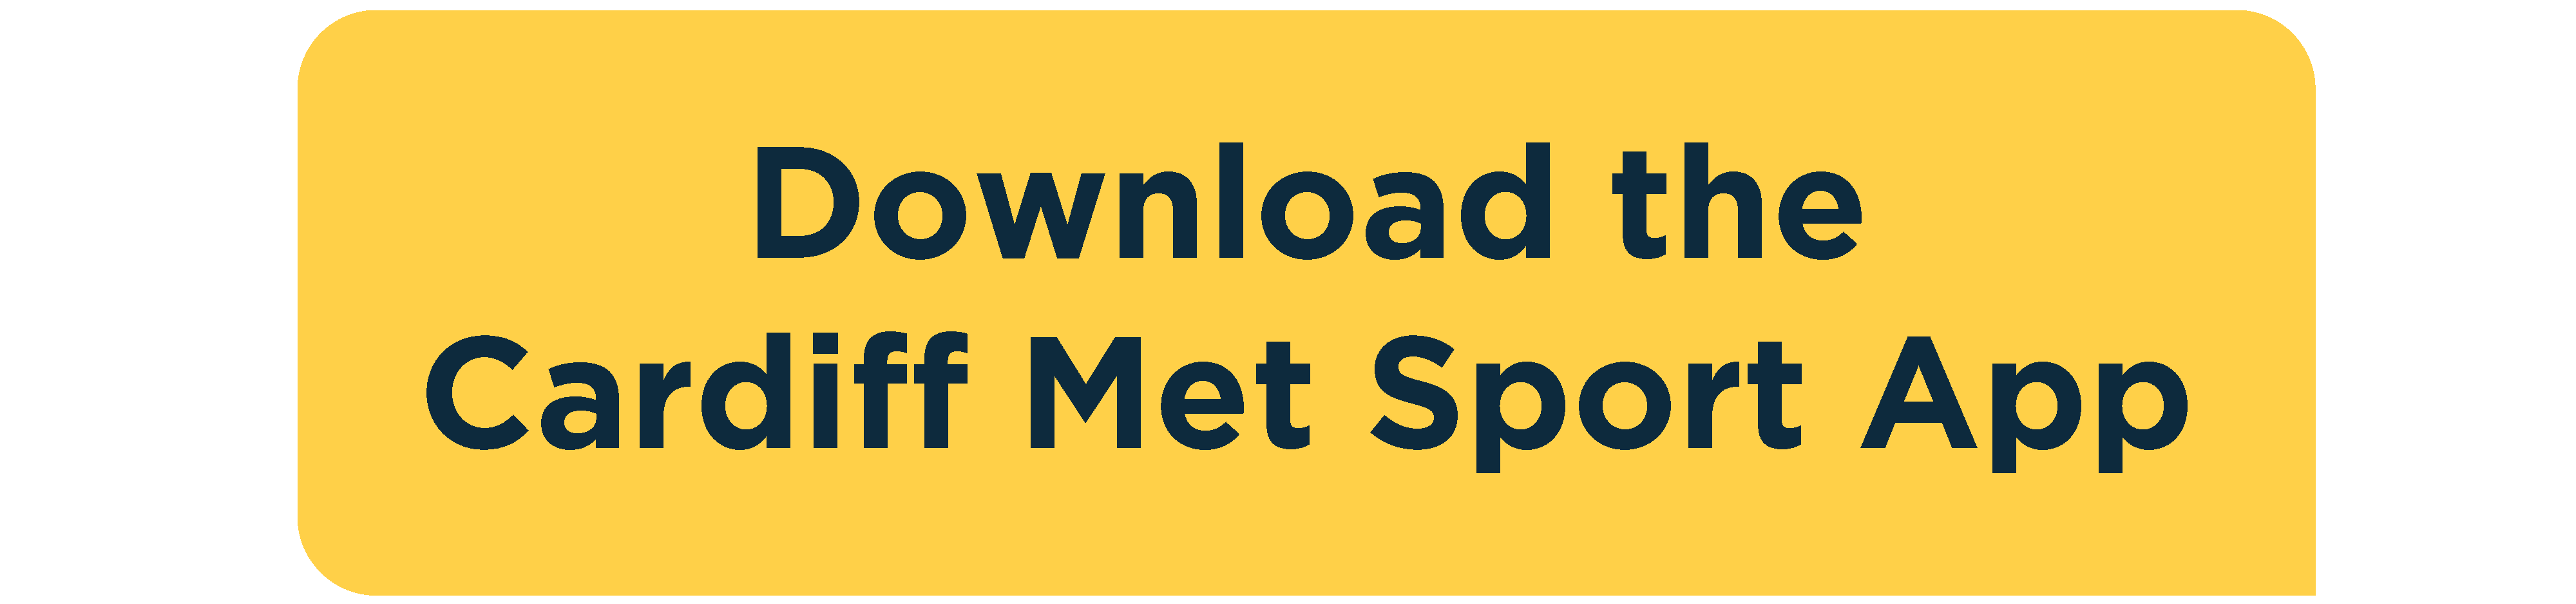 Download the Cardiff Met Sport App home page